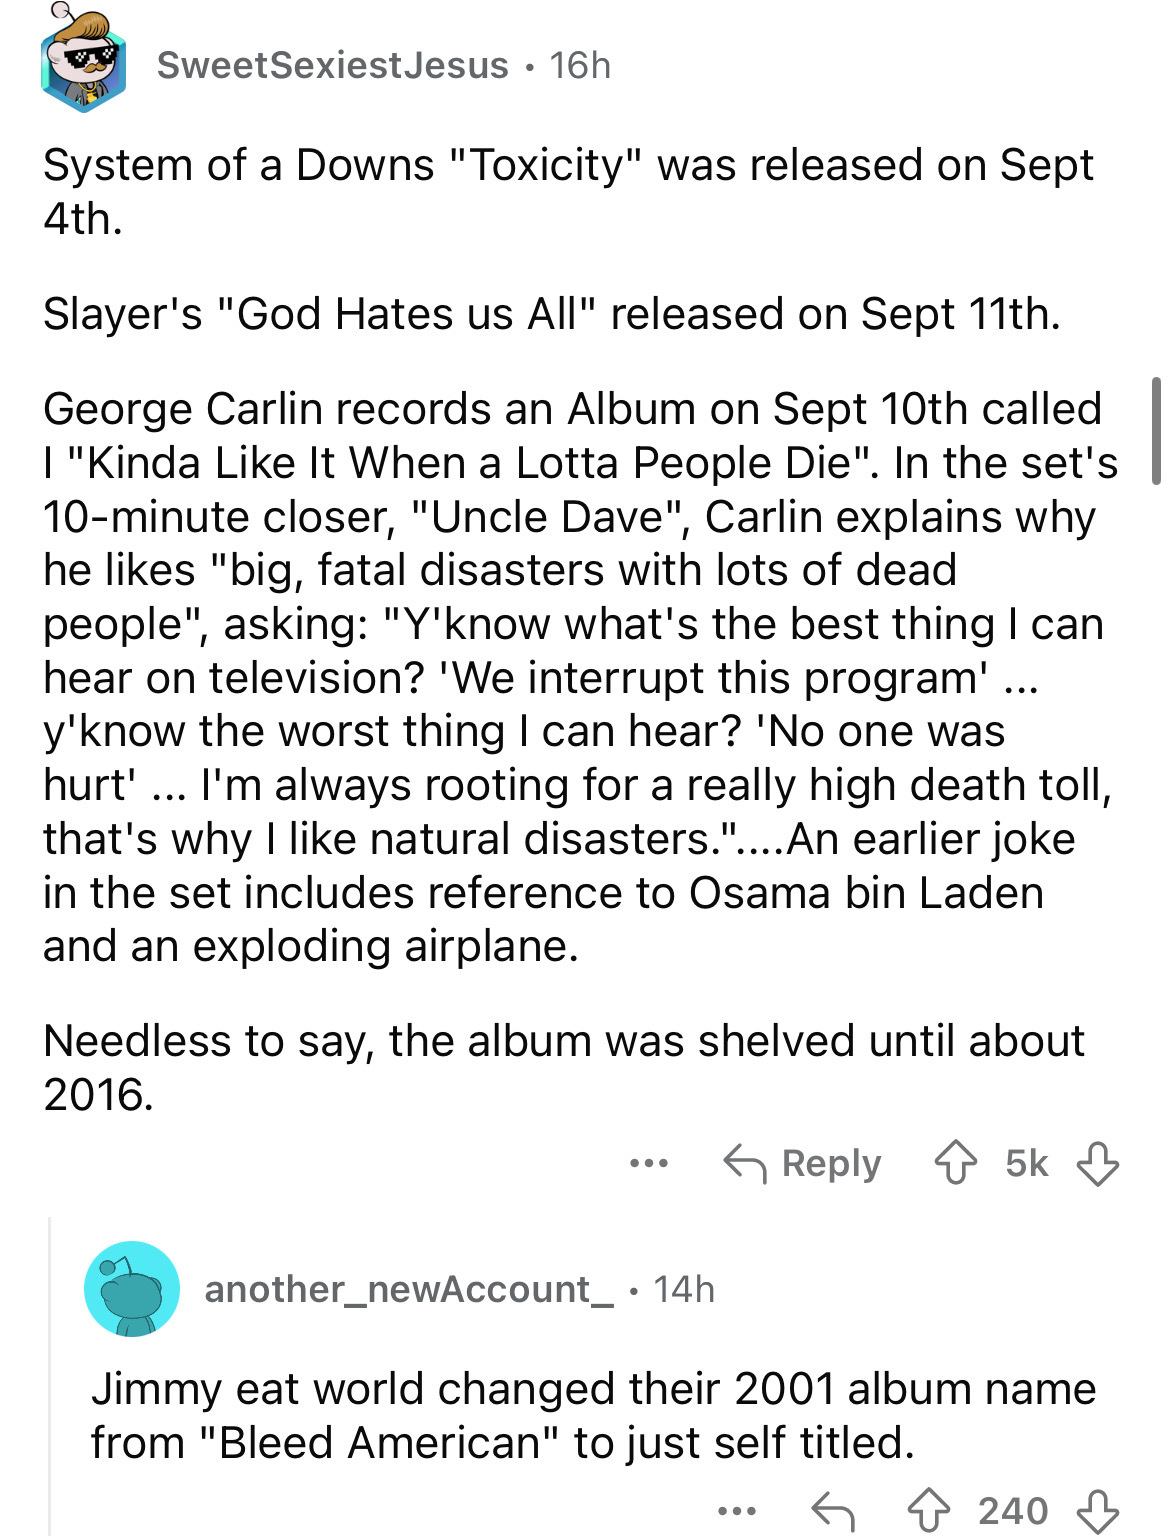 document - SweetSexiest Jesus 16h . System of a Downs "Toxicity" was released on Sept 4th. Slayer's "God Hates us All" released on Sept 11th. George Carlin records an Album on Sept 10th called I "Kinda It When a Lotta People Die". In the set's 10minute cl